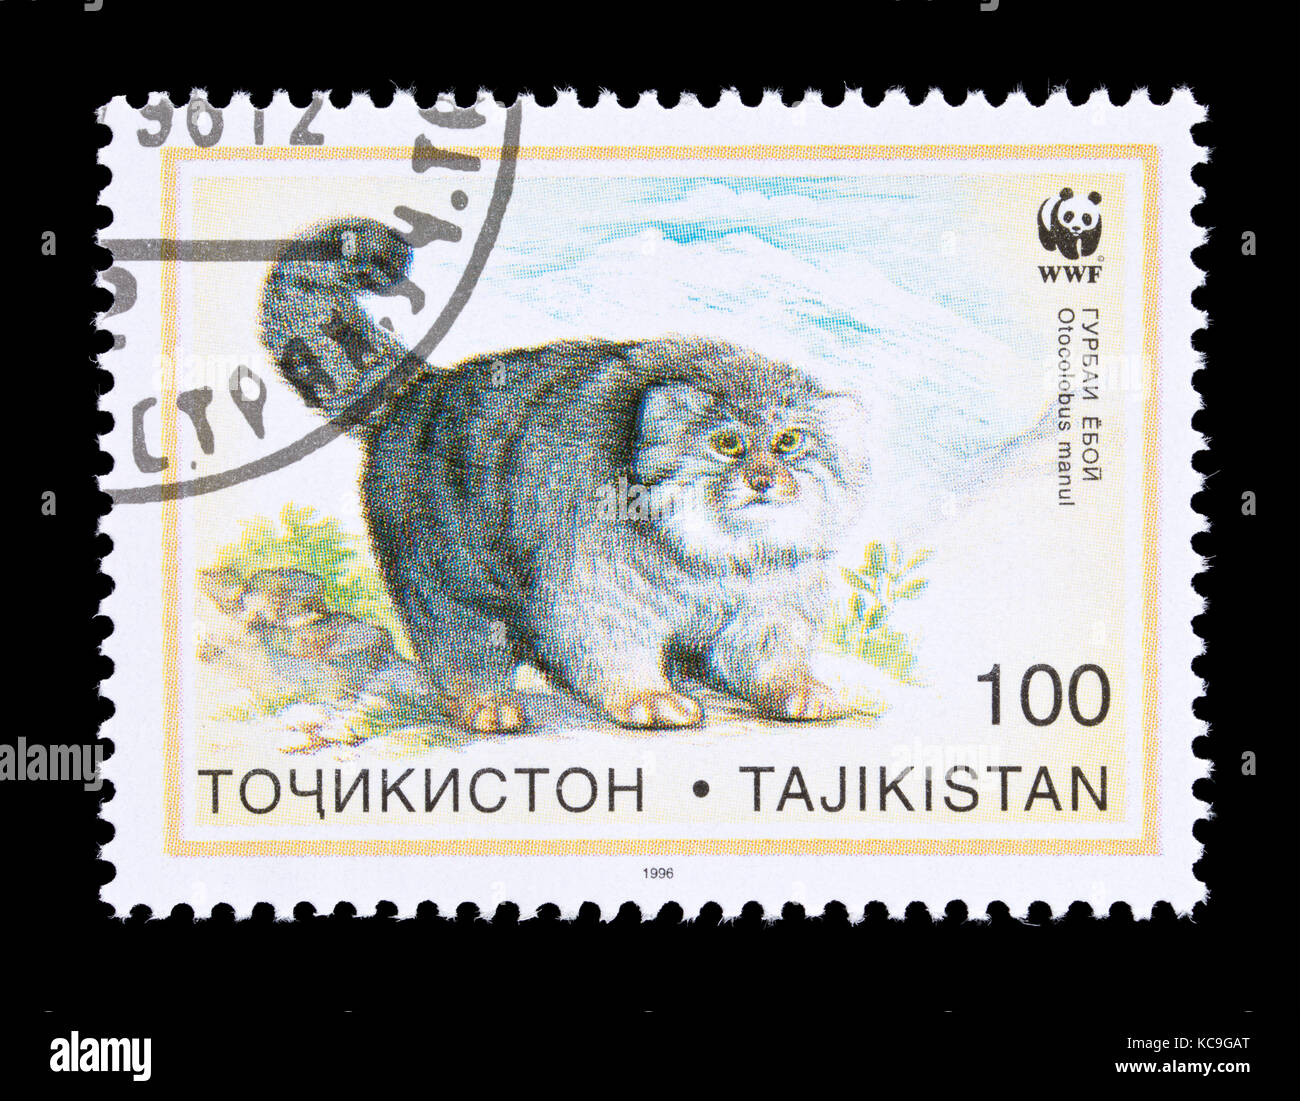 Postage stamp from Tajikistan depicting a Pallas's cat (Otocolobus manul) Stock Photo